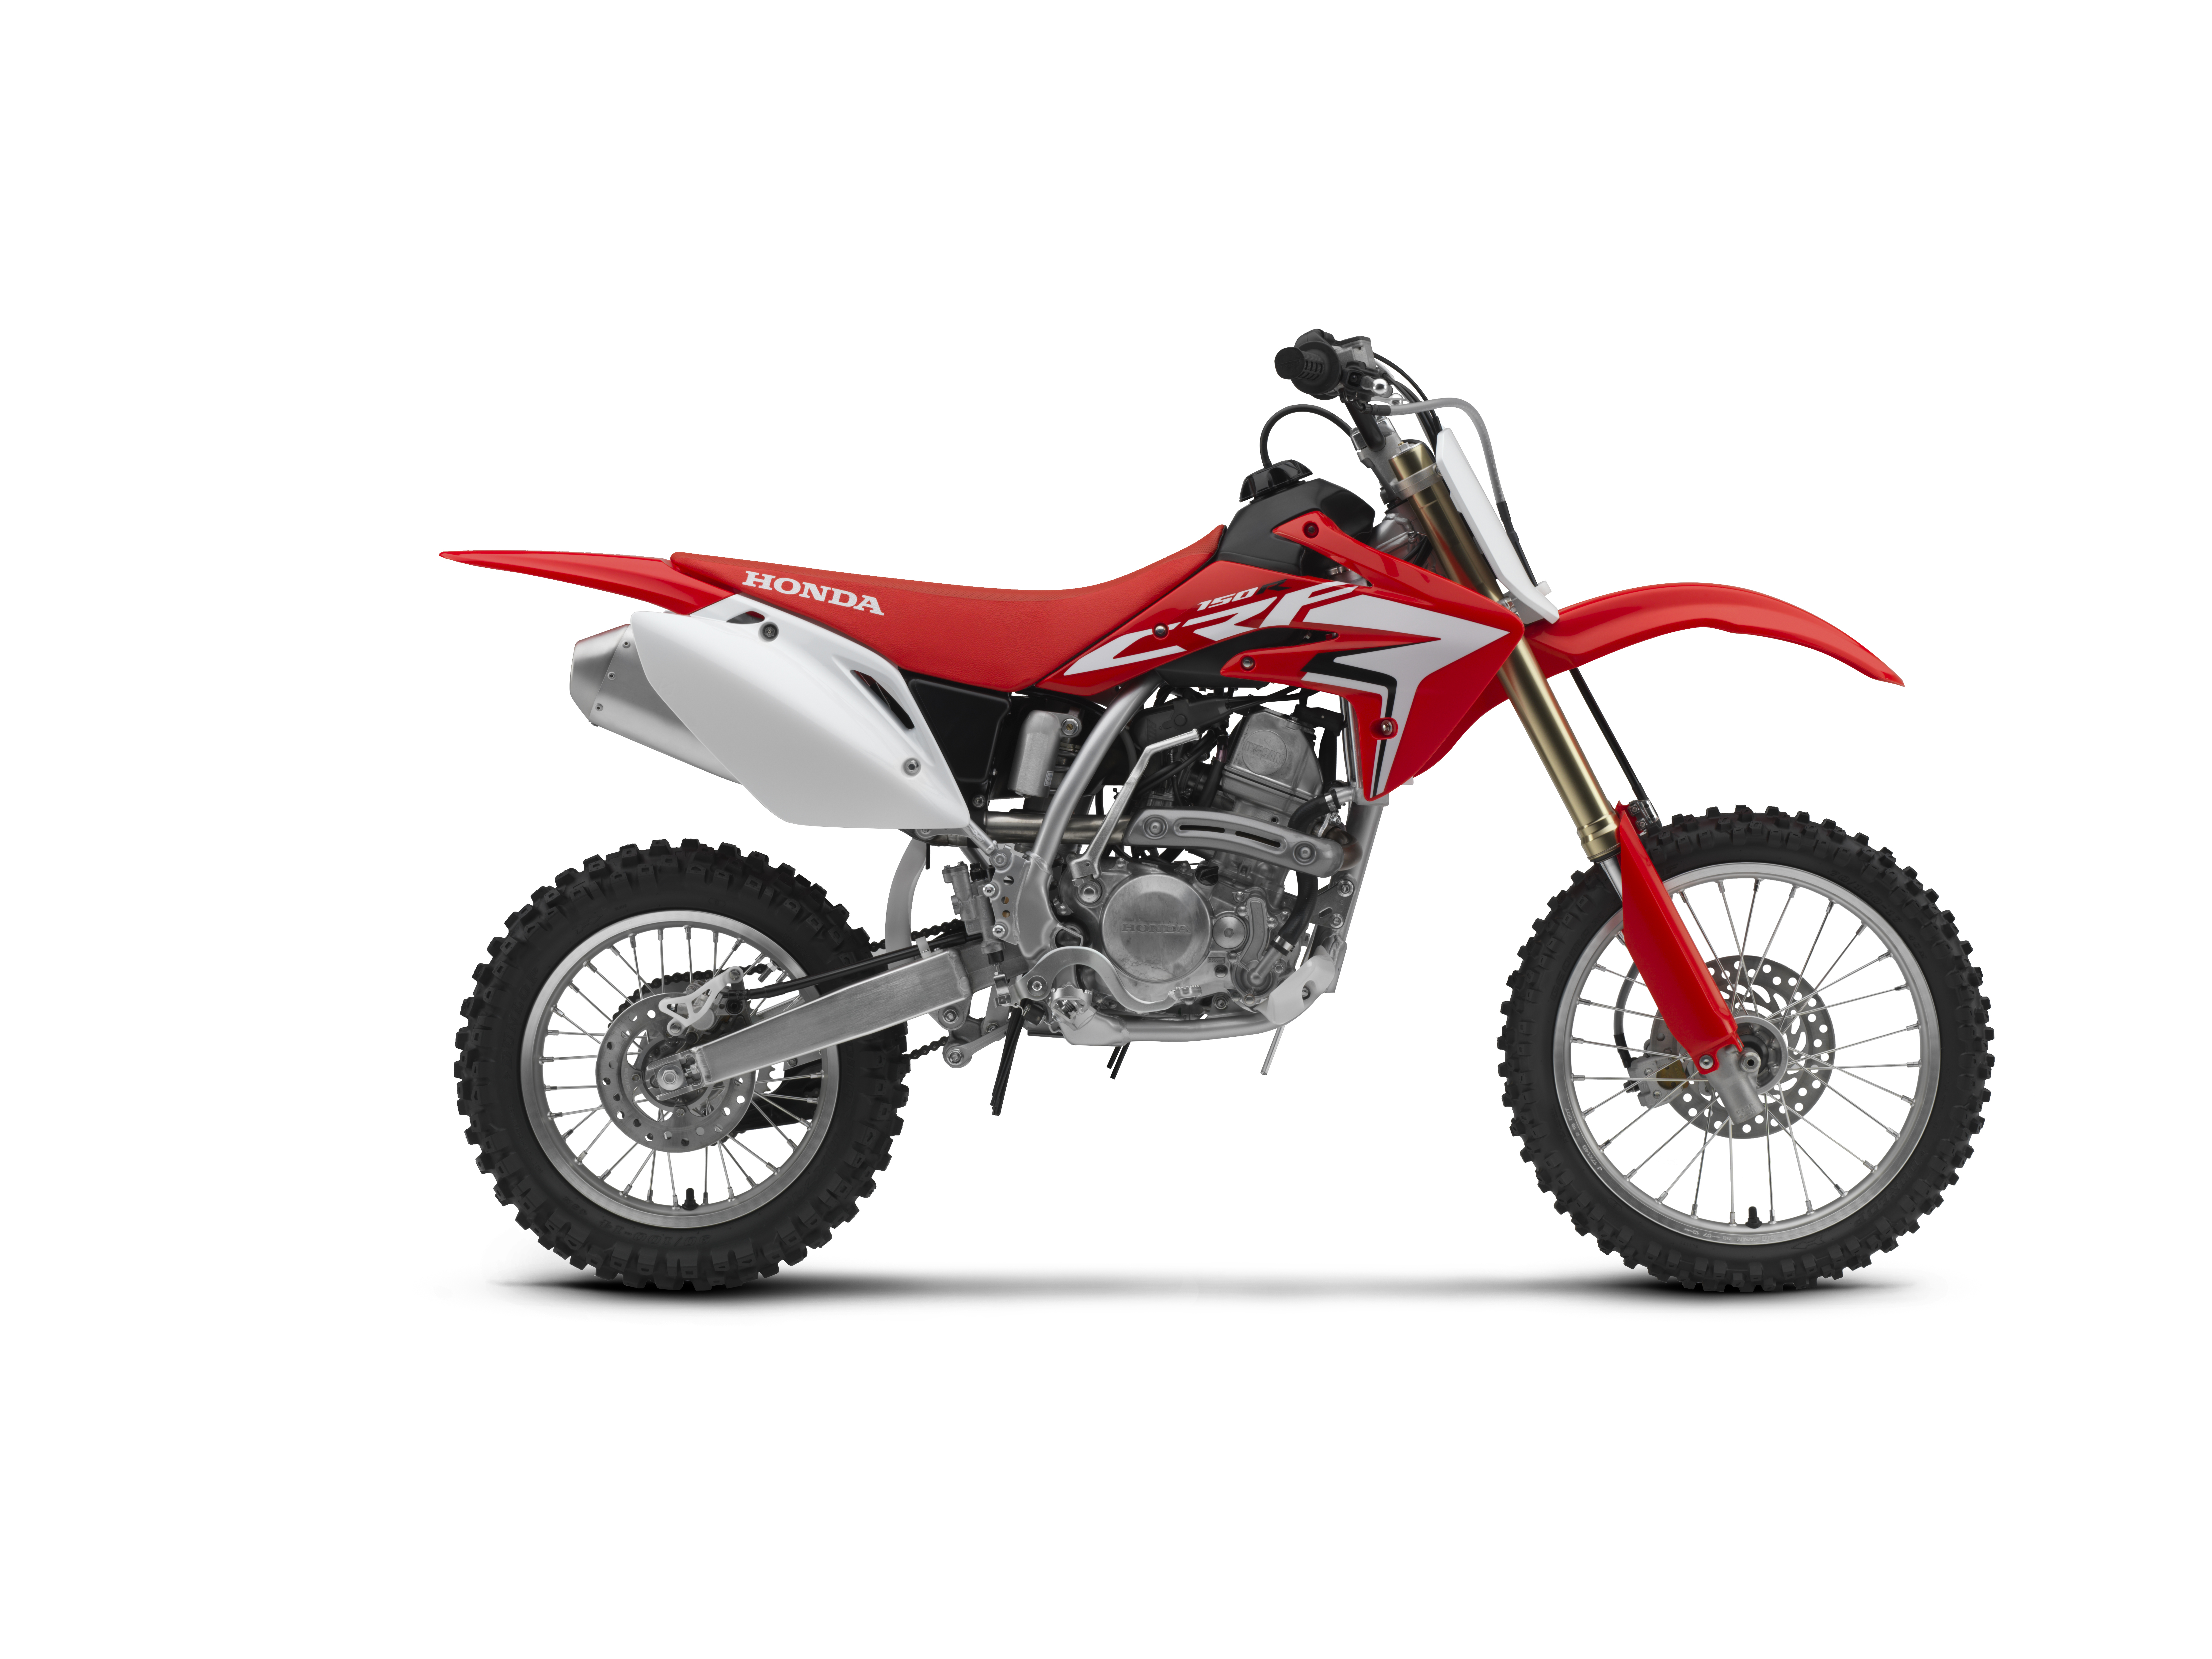 Honda Crf150r Crf150r Expert Buyer S Guide Specs Photos Price Cycle World